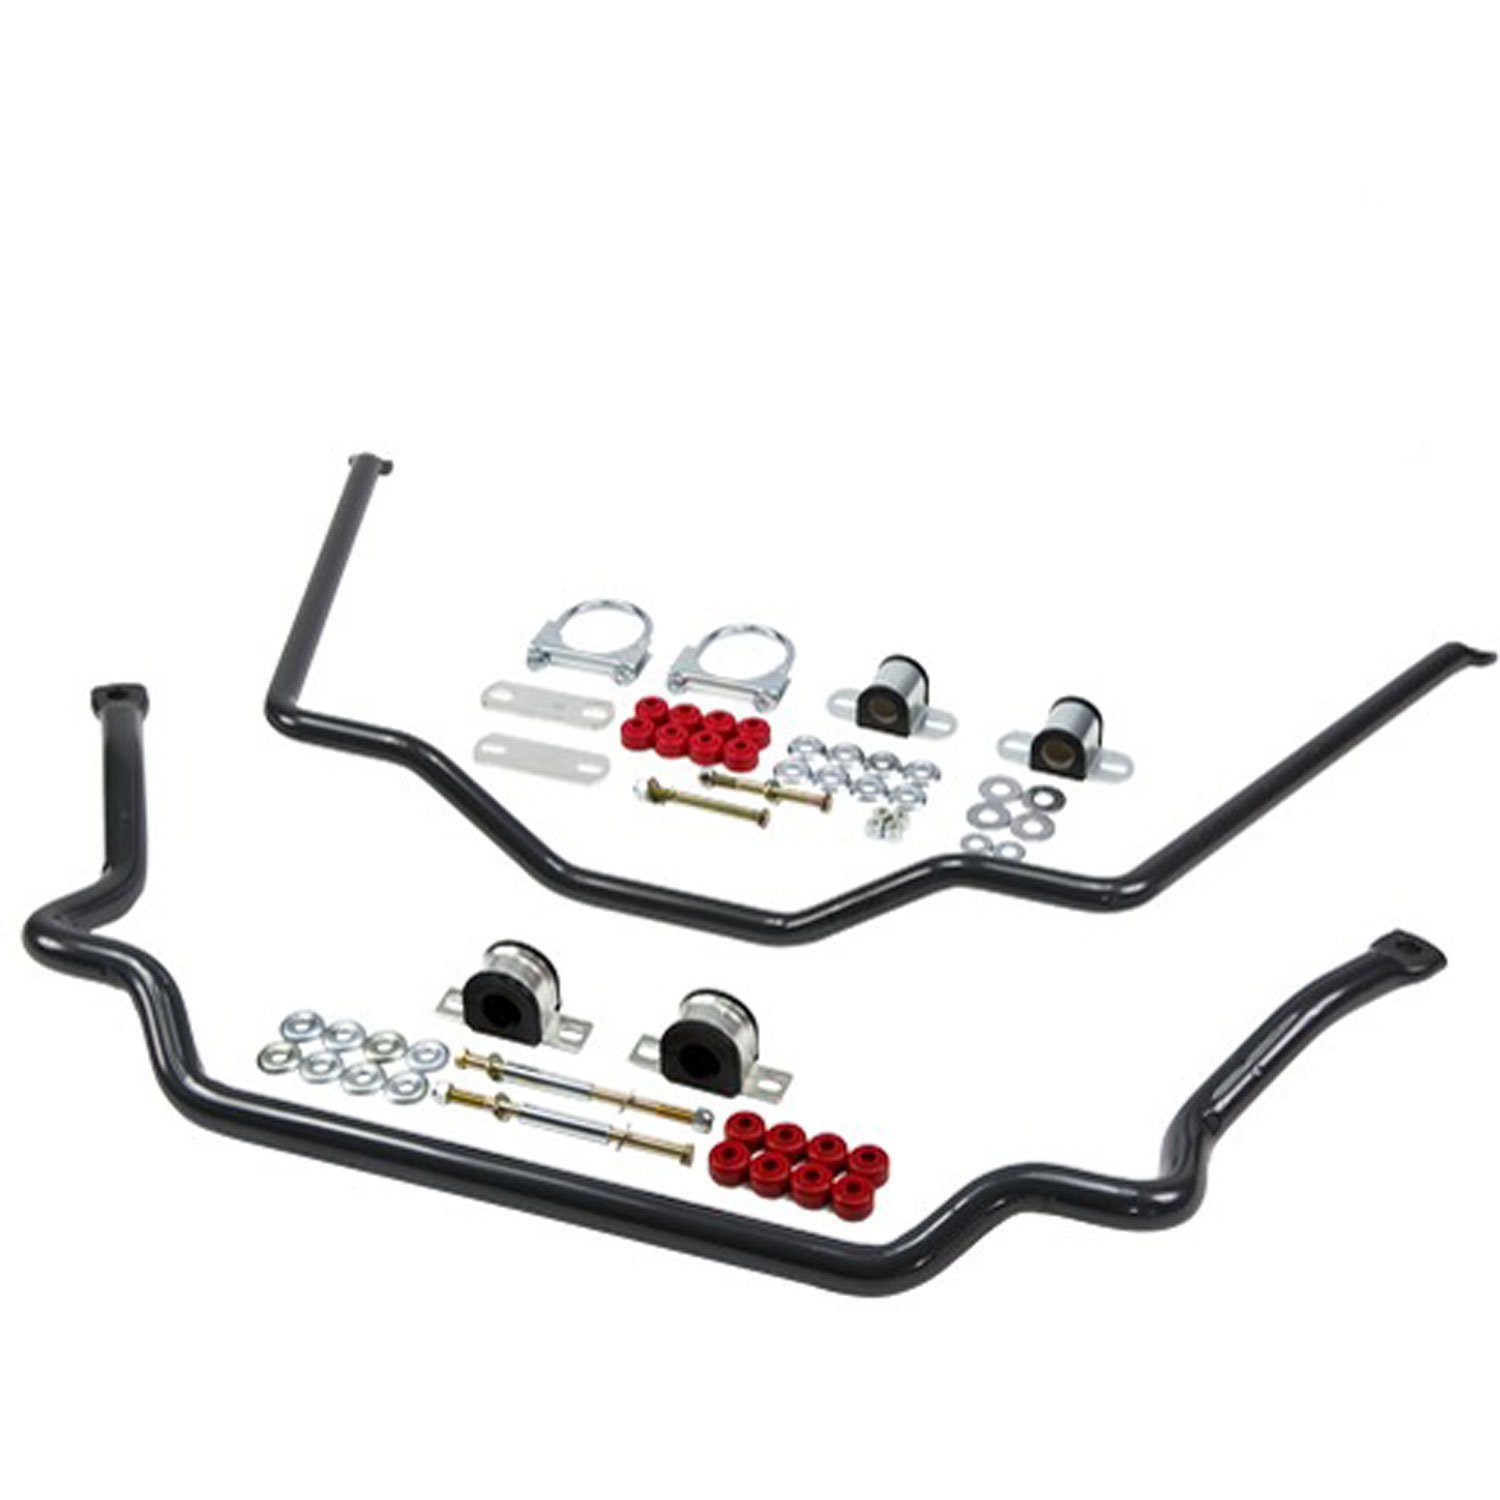 Front/Rear Sway Bar Kit for 1982-2004 S-Series Pick-Up